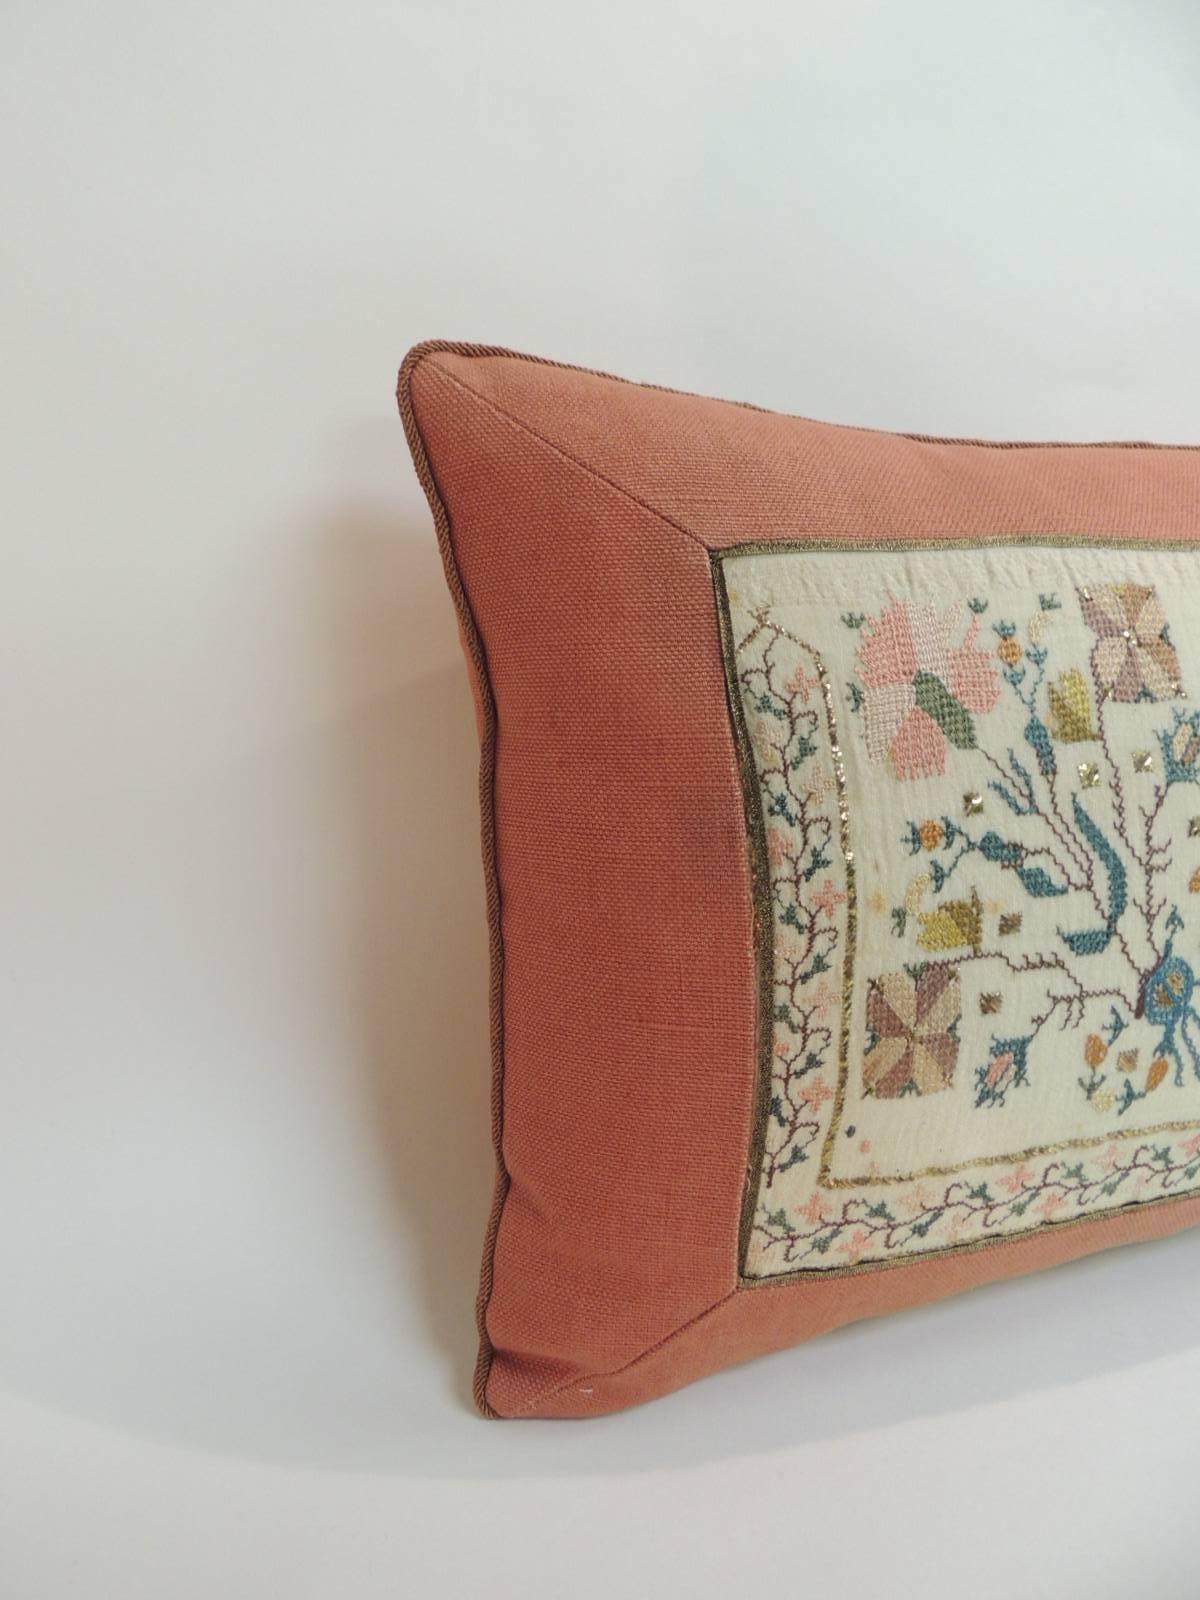 19th century Turkish embroidered linen and silk decorative lumbar pillow
Hand-made with a floral pattern embroidered silk on linen textile with gold metallic thread accents. Lumbar decorative pillow framed with an orange linen and orange trims.